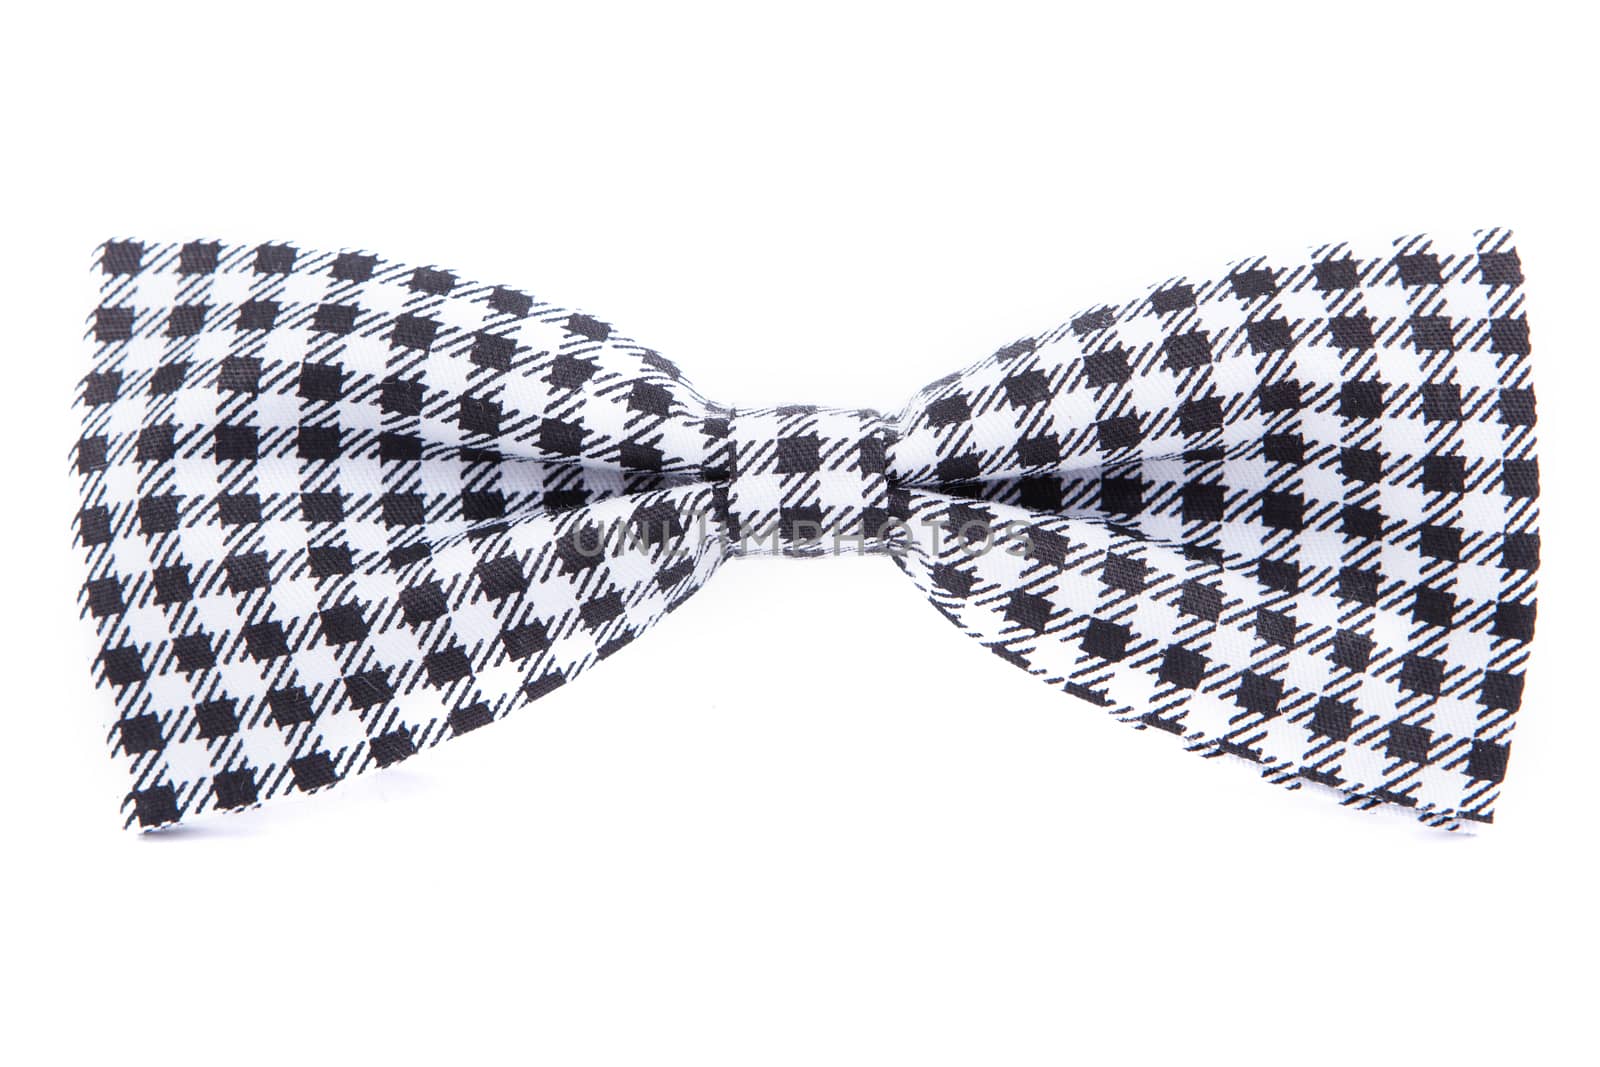 checkered bow tie isolated on white background